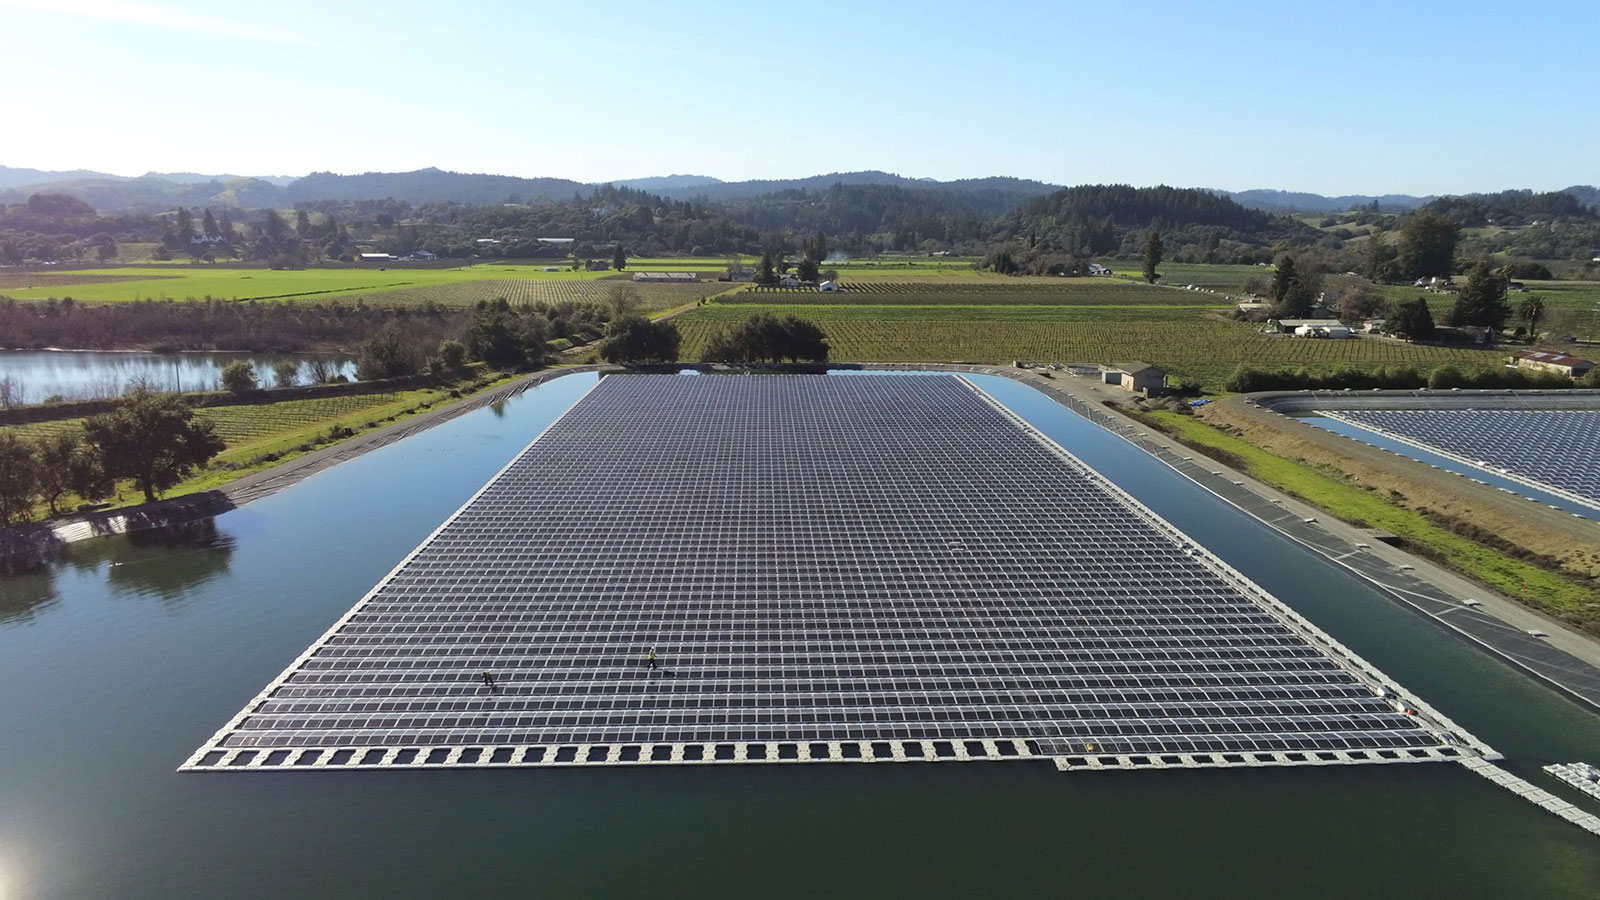 Coming soon to a lake near you: Floating solar panels